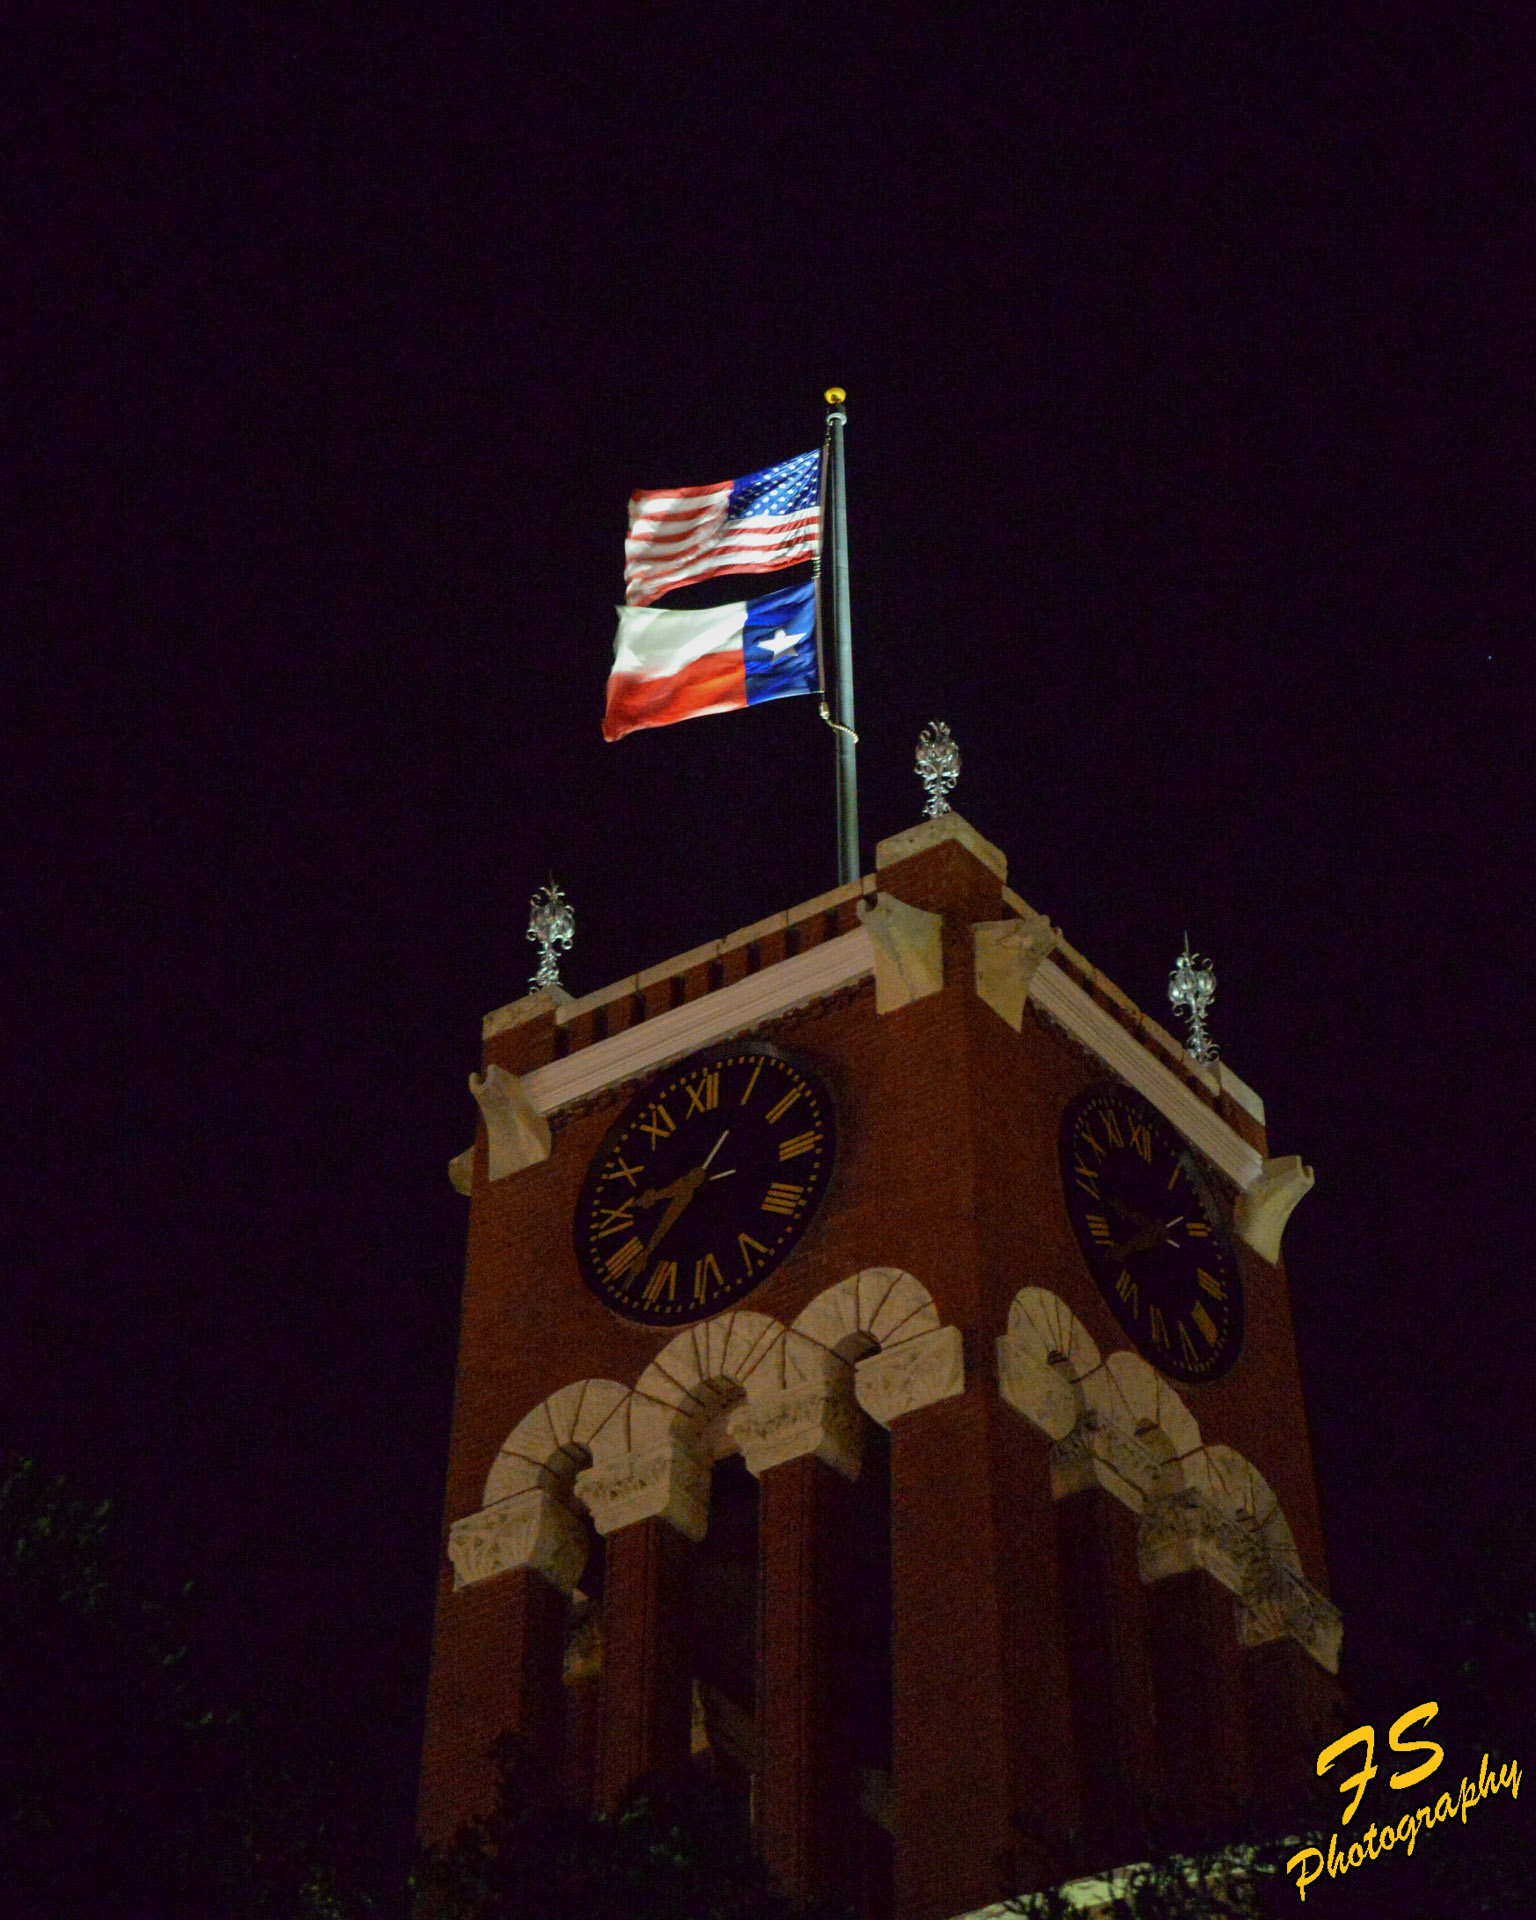 New Flags on the Lee County Courthouse